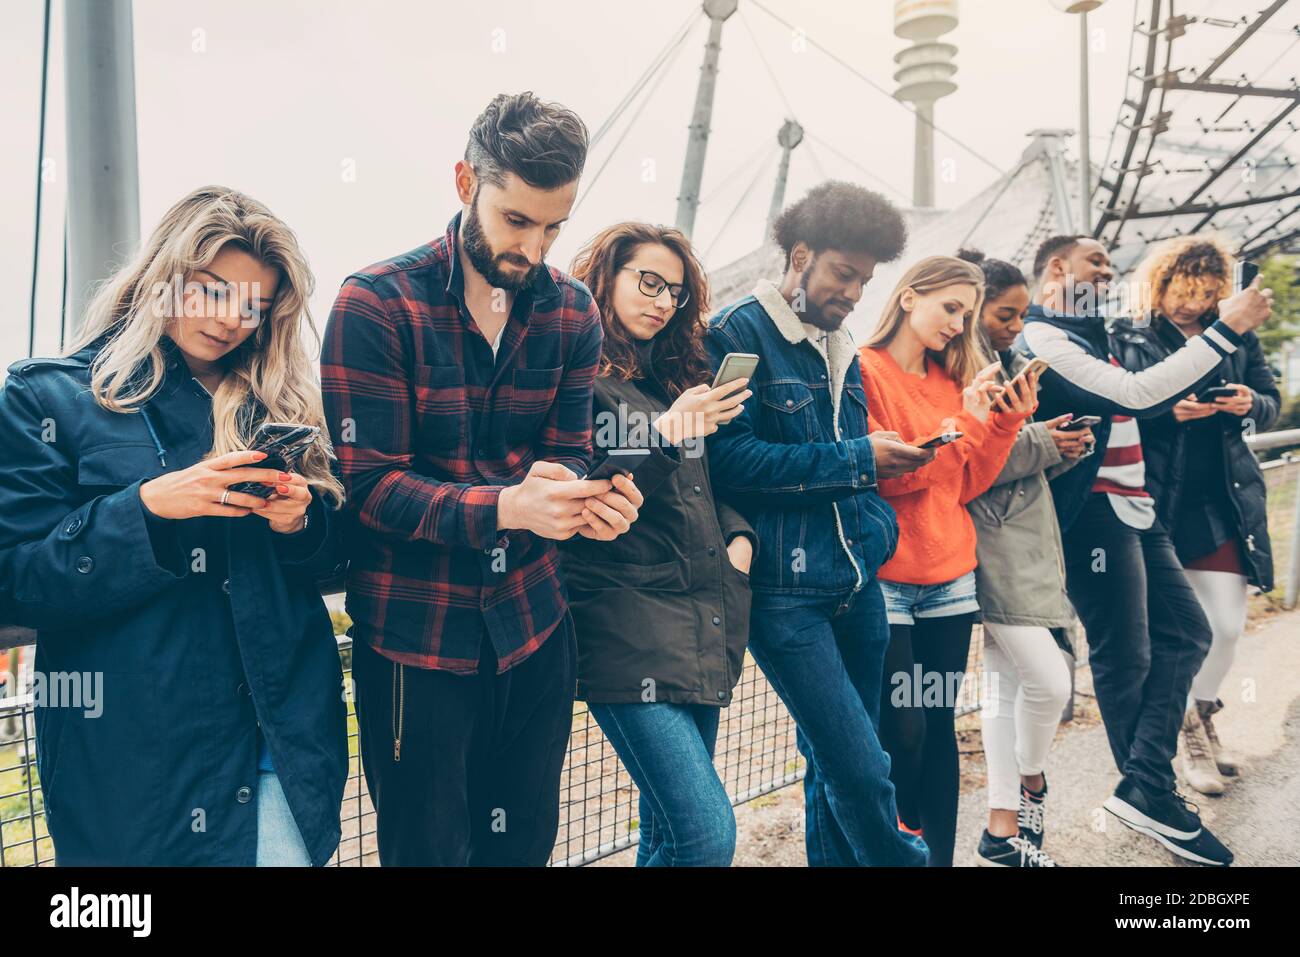 Group of young people staring on their phones avoiding other forms of social contact Stock Photo